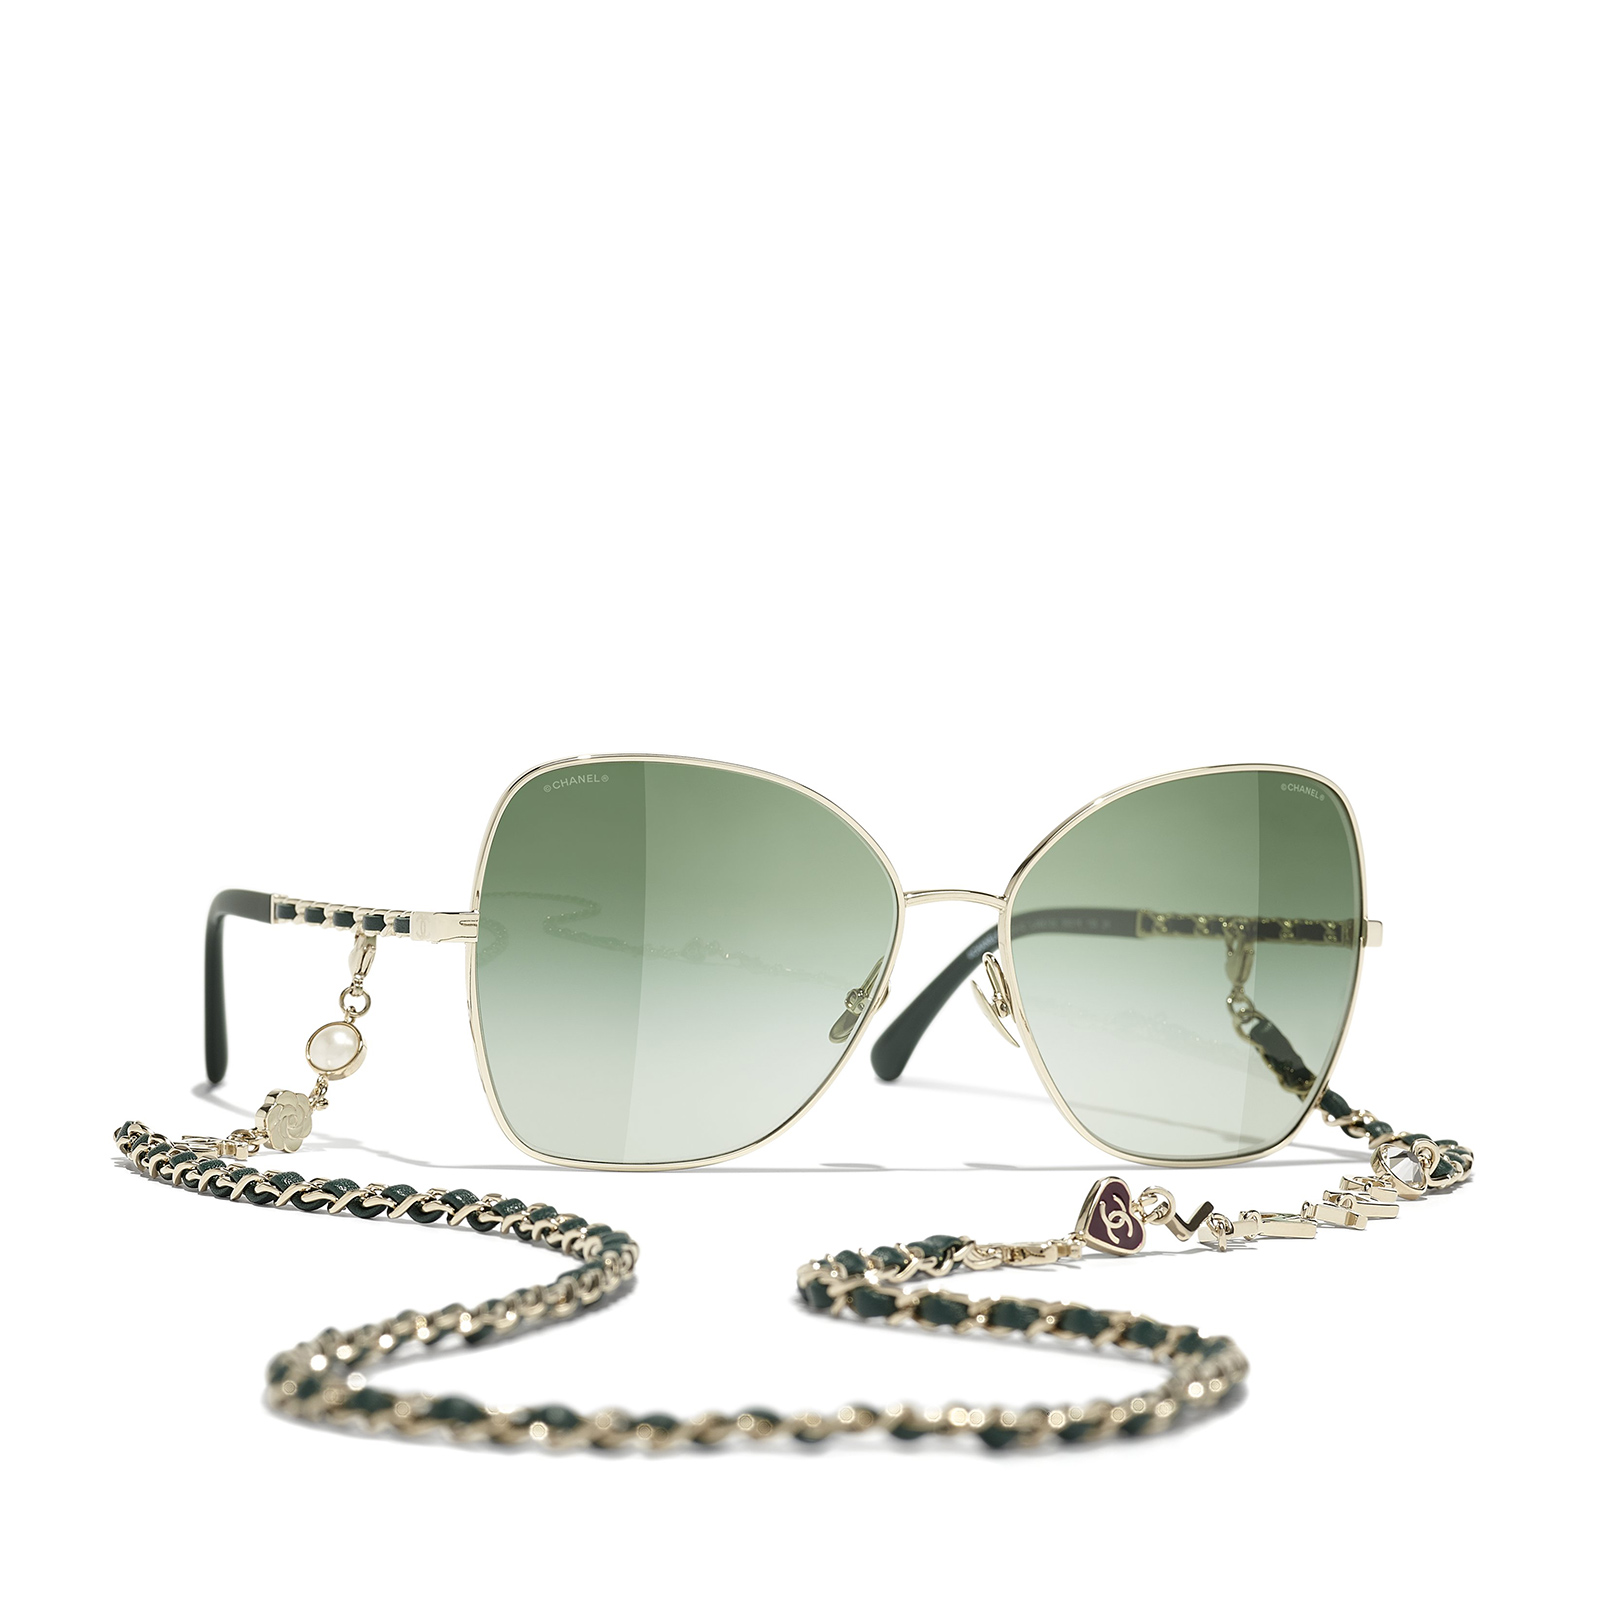 CHANEL butterfly Sunglasses C468S3 Gold & Green - three-quarters view